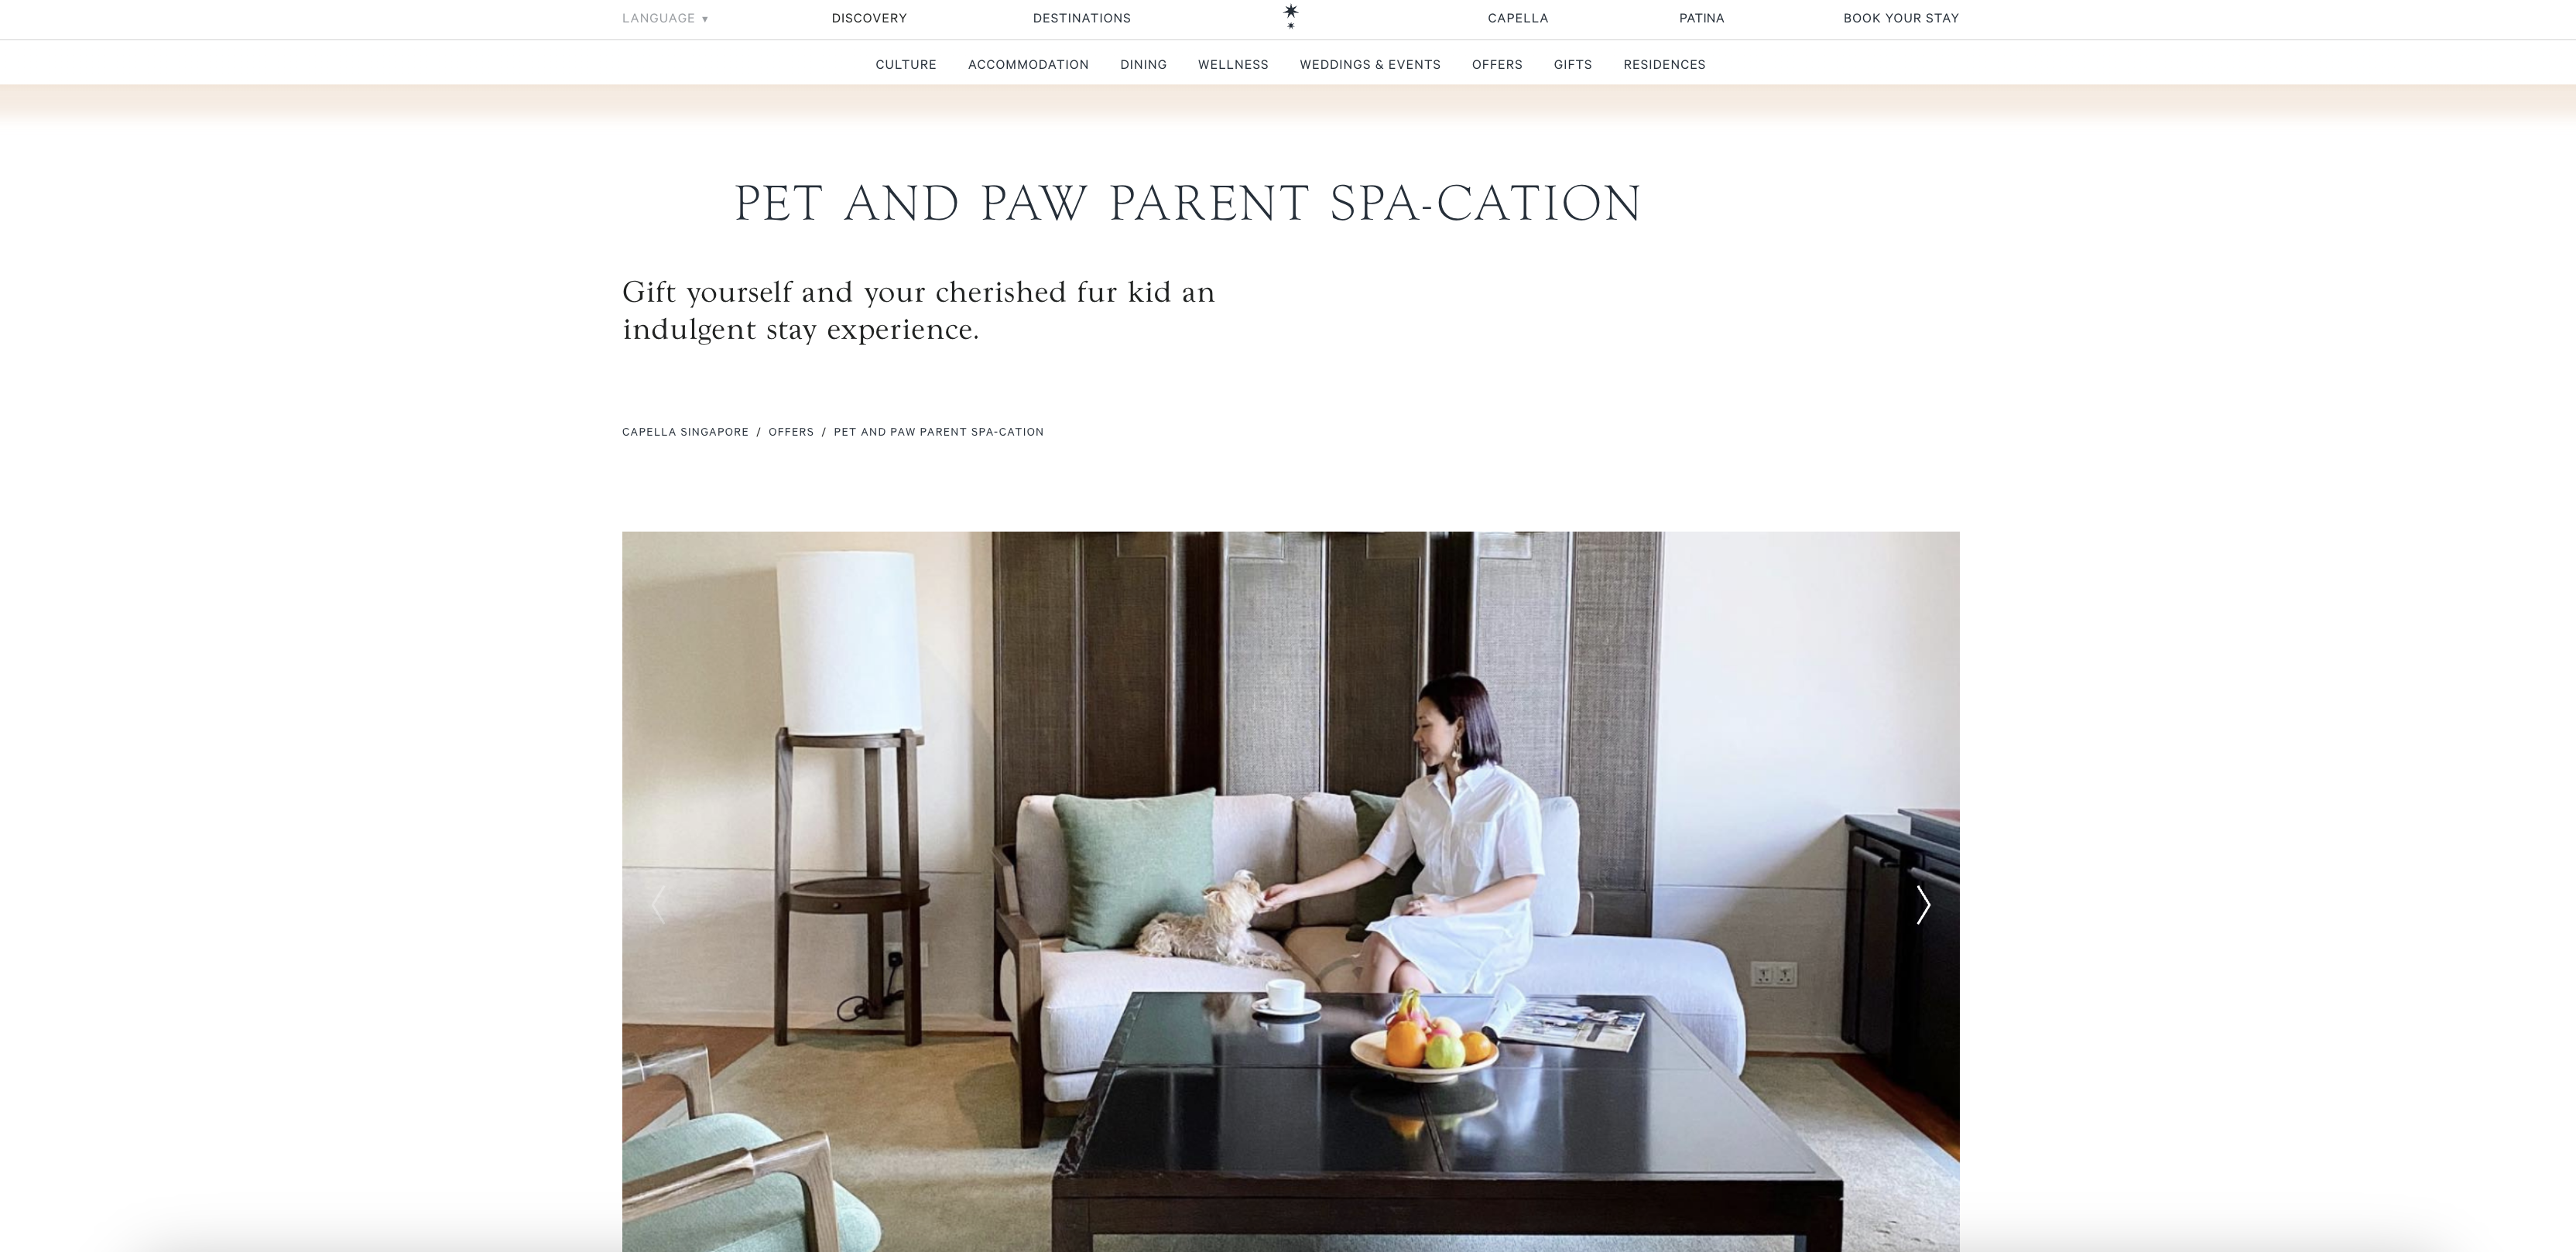 PET AND PAW PARENT SPA-CATION